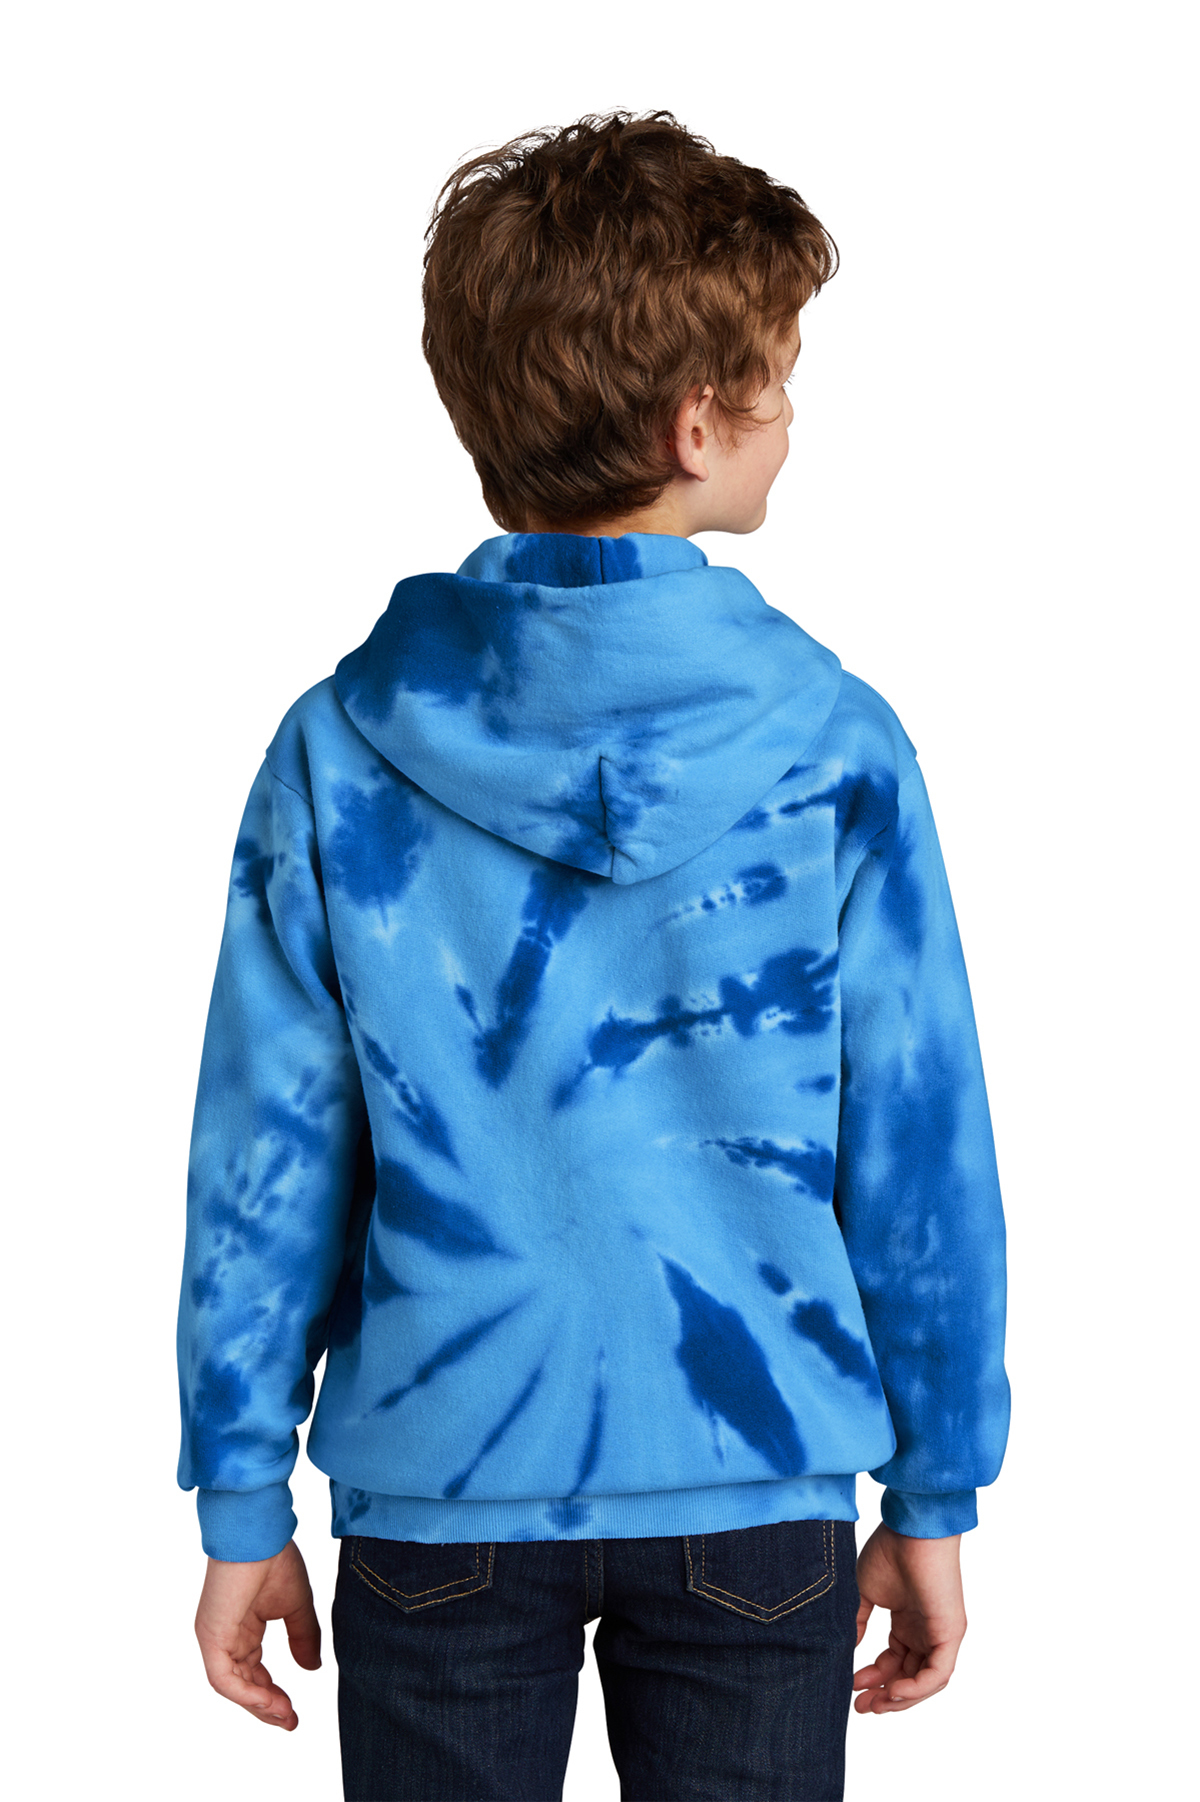 Port & Company Youth Tie-Dye Pullover Hooded Sweatshirt | Product ...